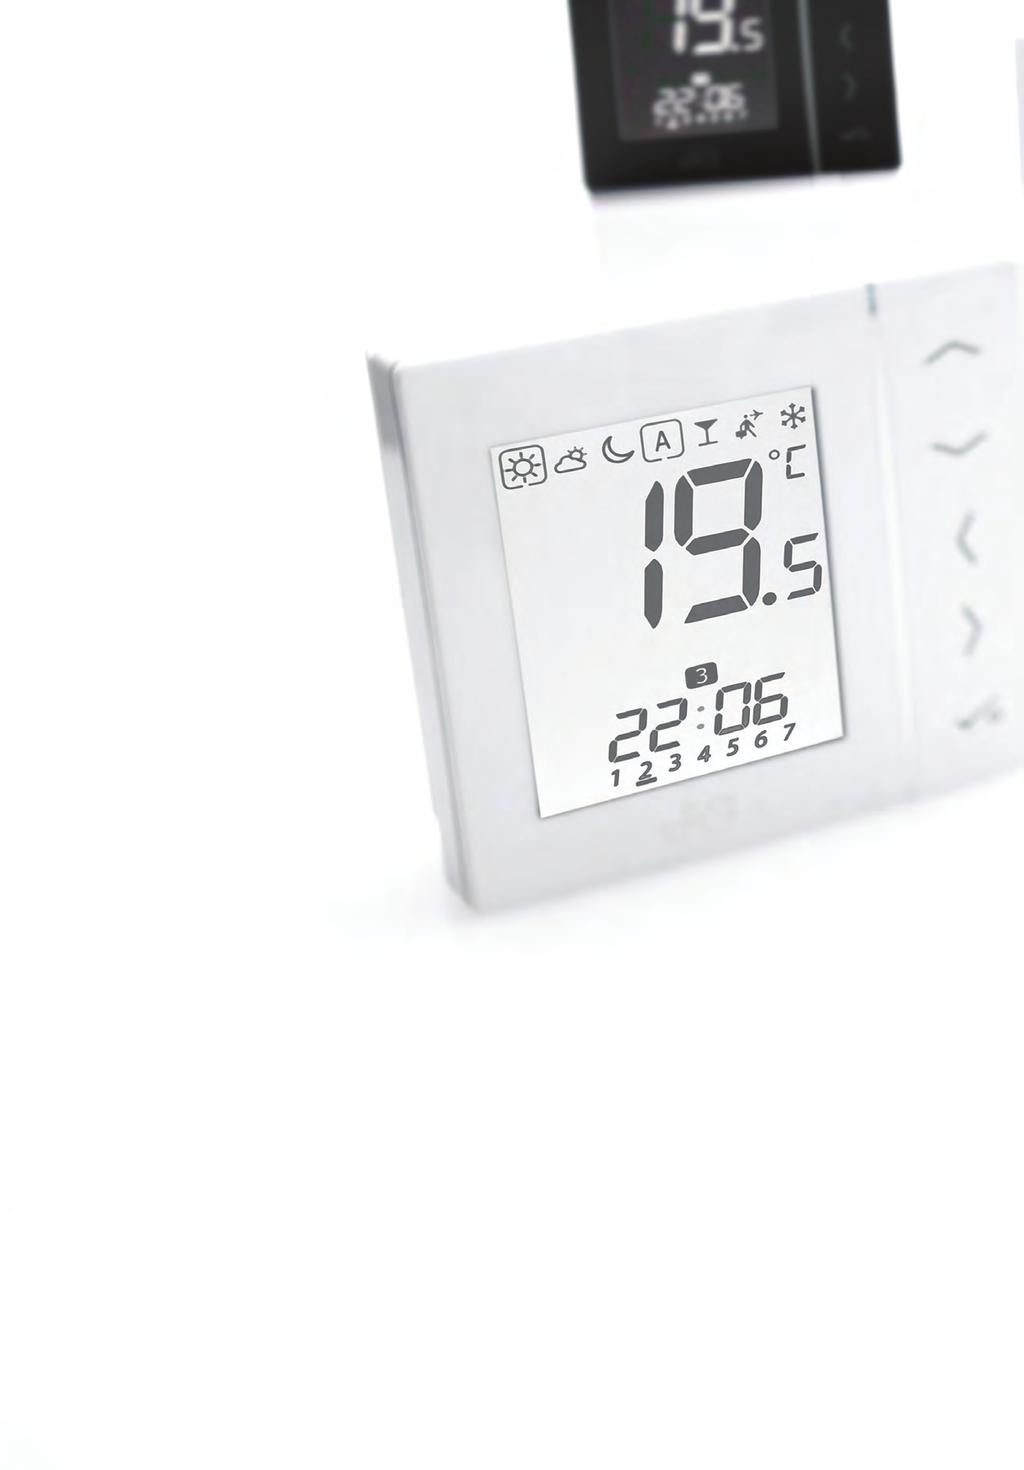 JG Aura is the new heating control concept from JG Speedfit, which allows for a more flexible and efficient remote regulation of your underfloor and central heating system as well as individual